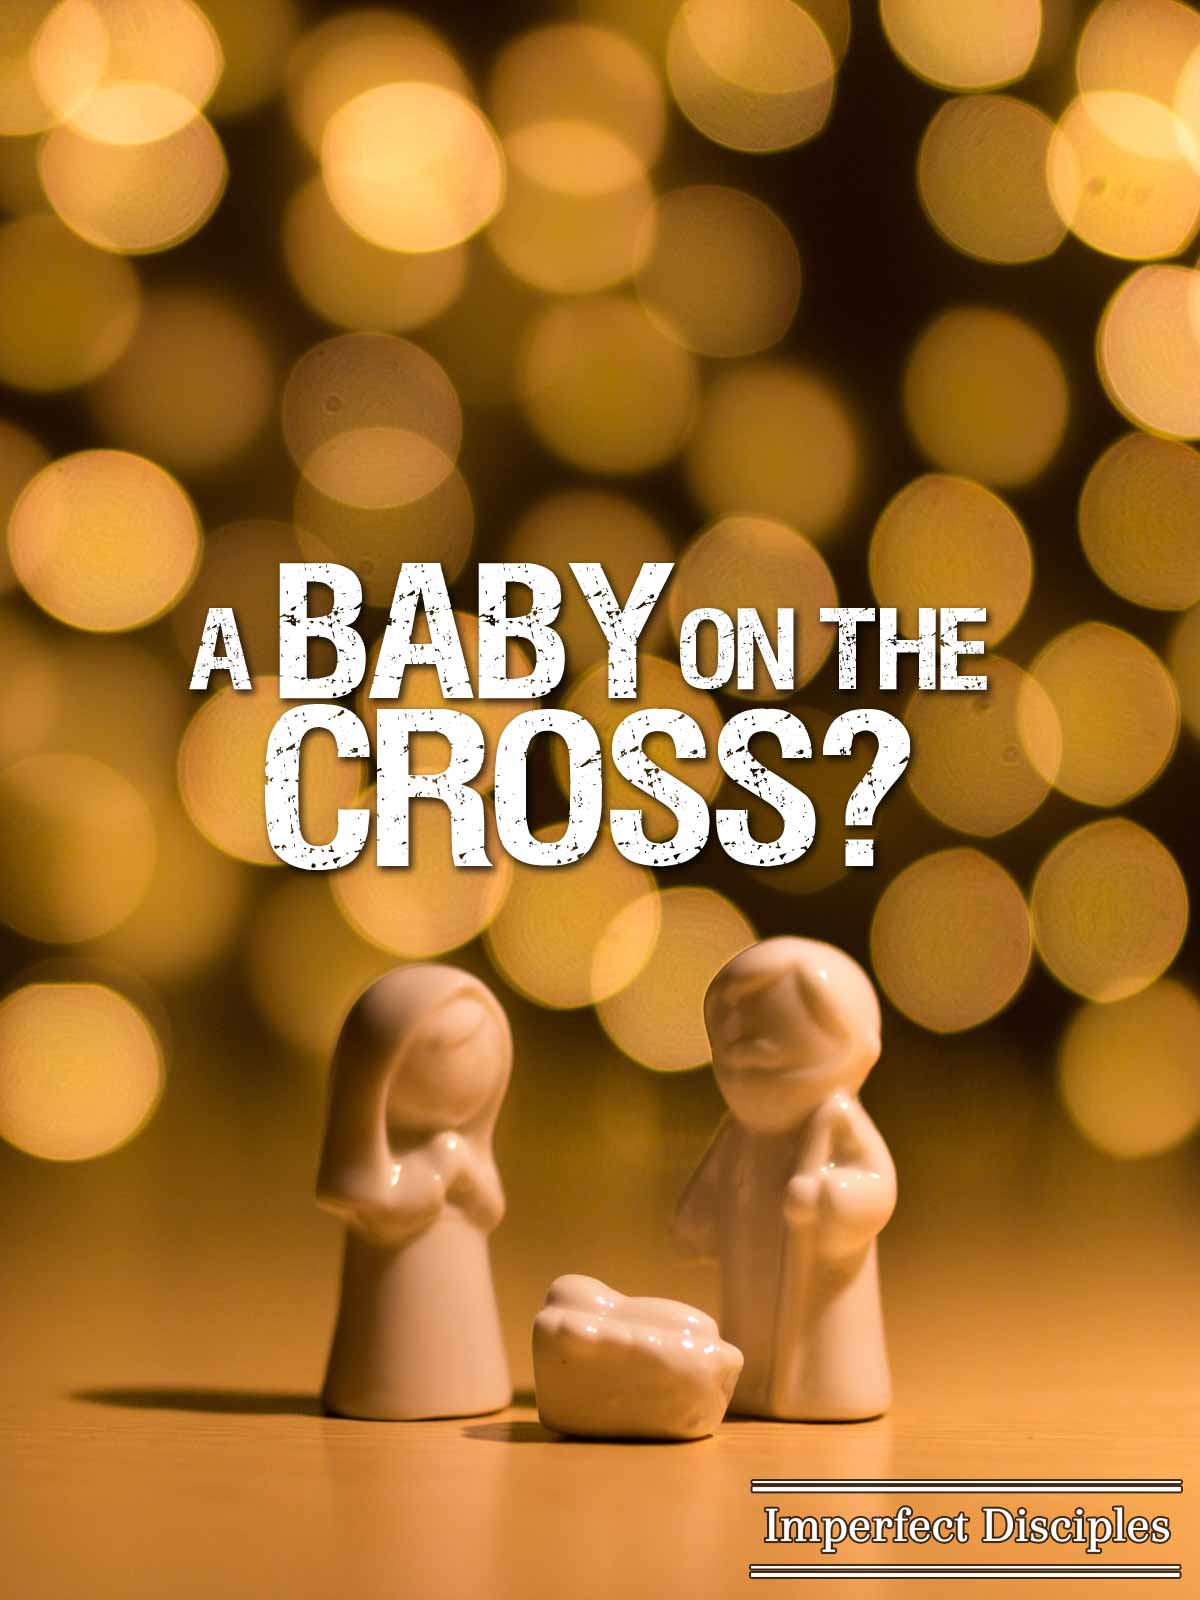 A Baby on the Cross?